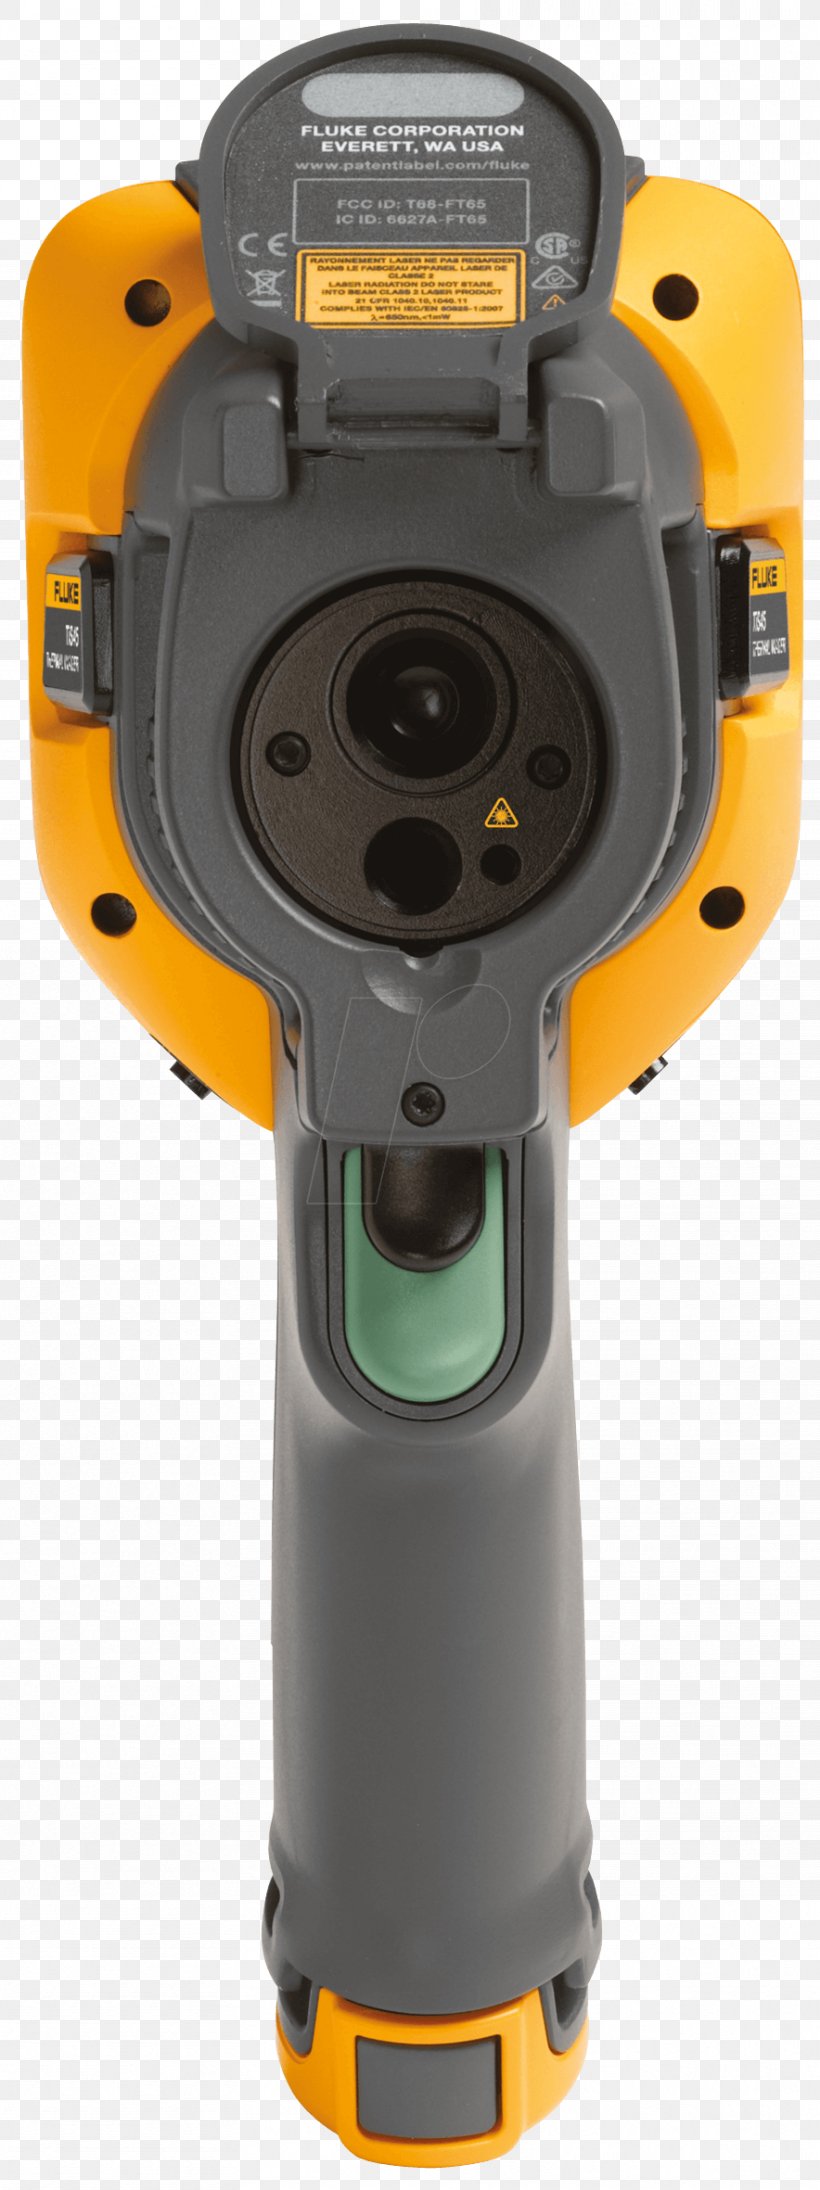 Thermographic Camera Thermal Imaging Camera Fluke Corporation Thermography, PNG, 884x2362px, Thermographic Camera, Camera, Fixedfocus Lens, Fluke Corporation, Hardware Download Free